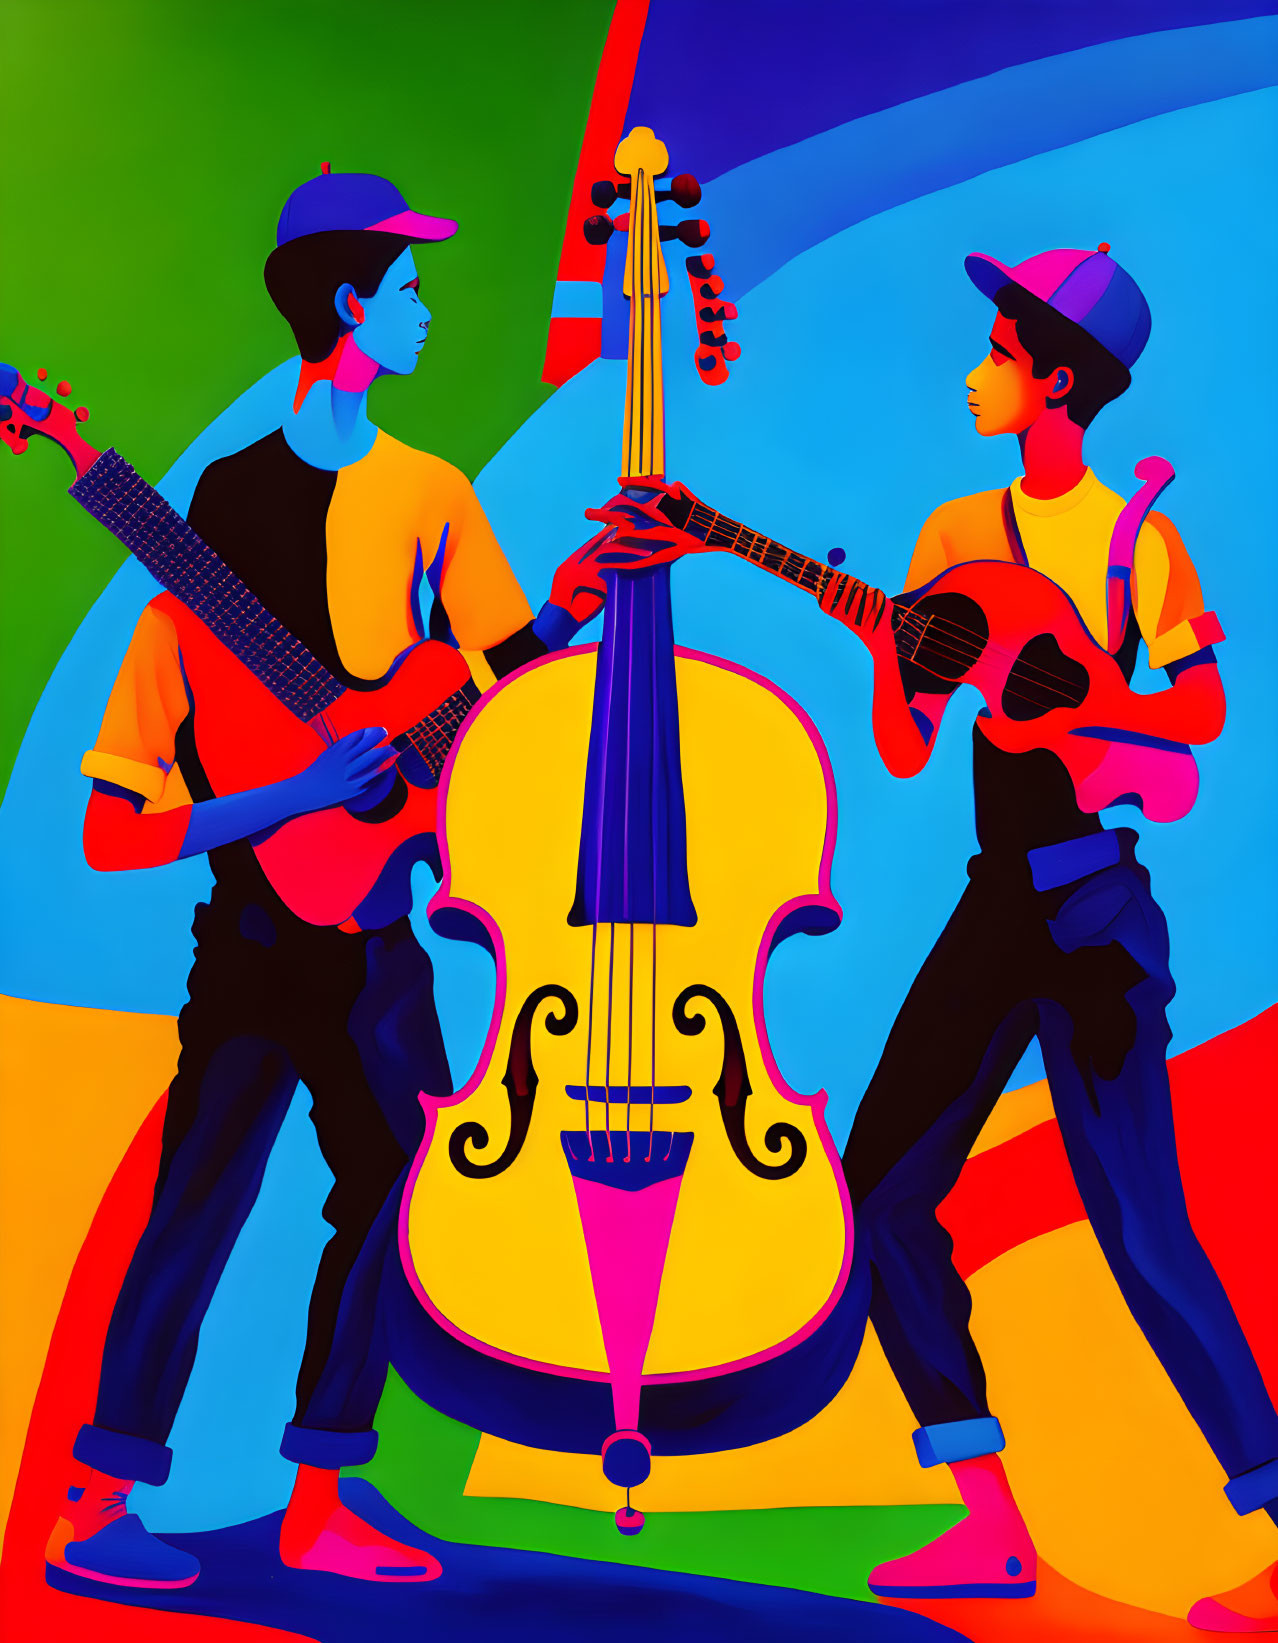 Stylized figures with musical instruments on vibrant background